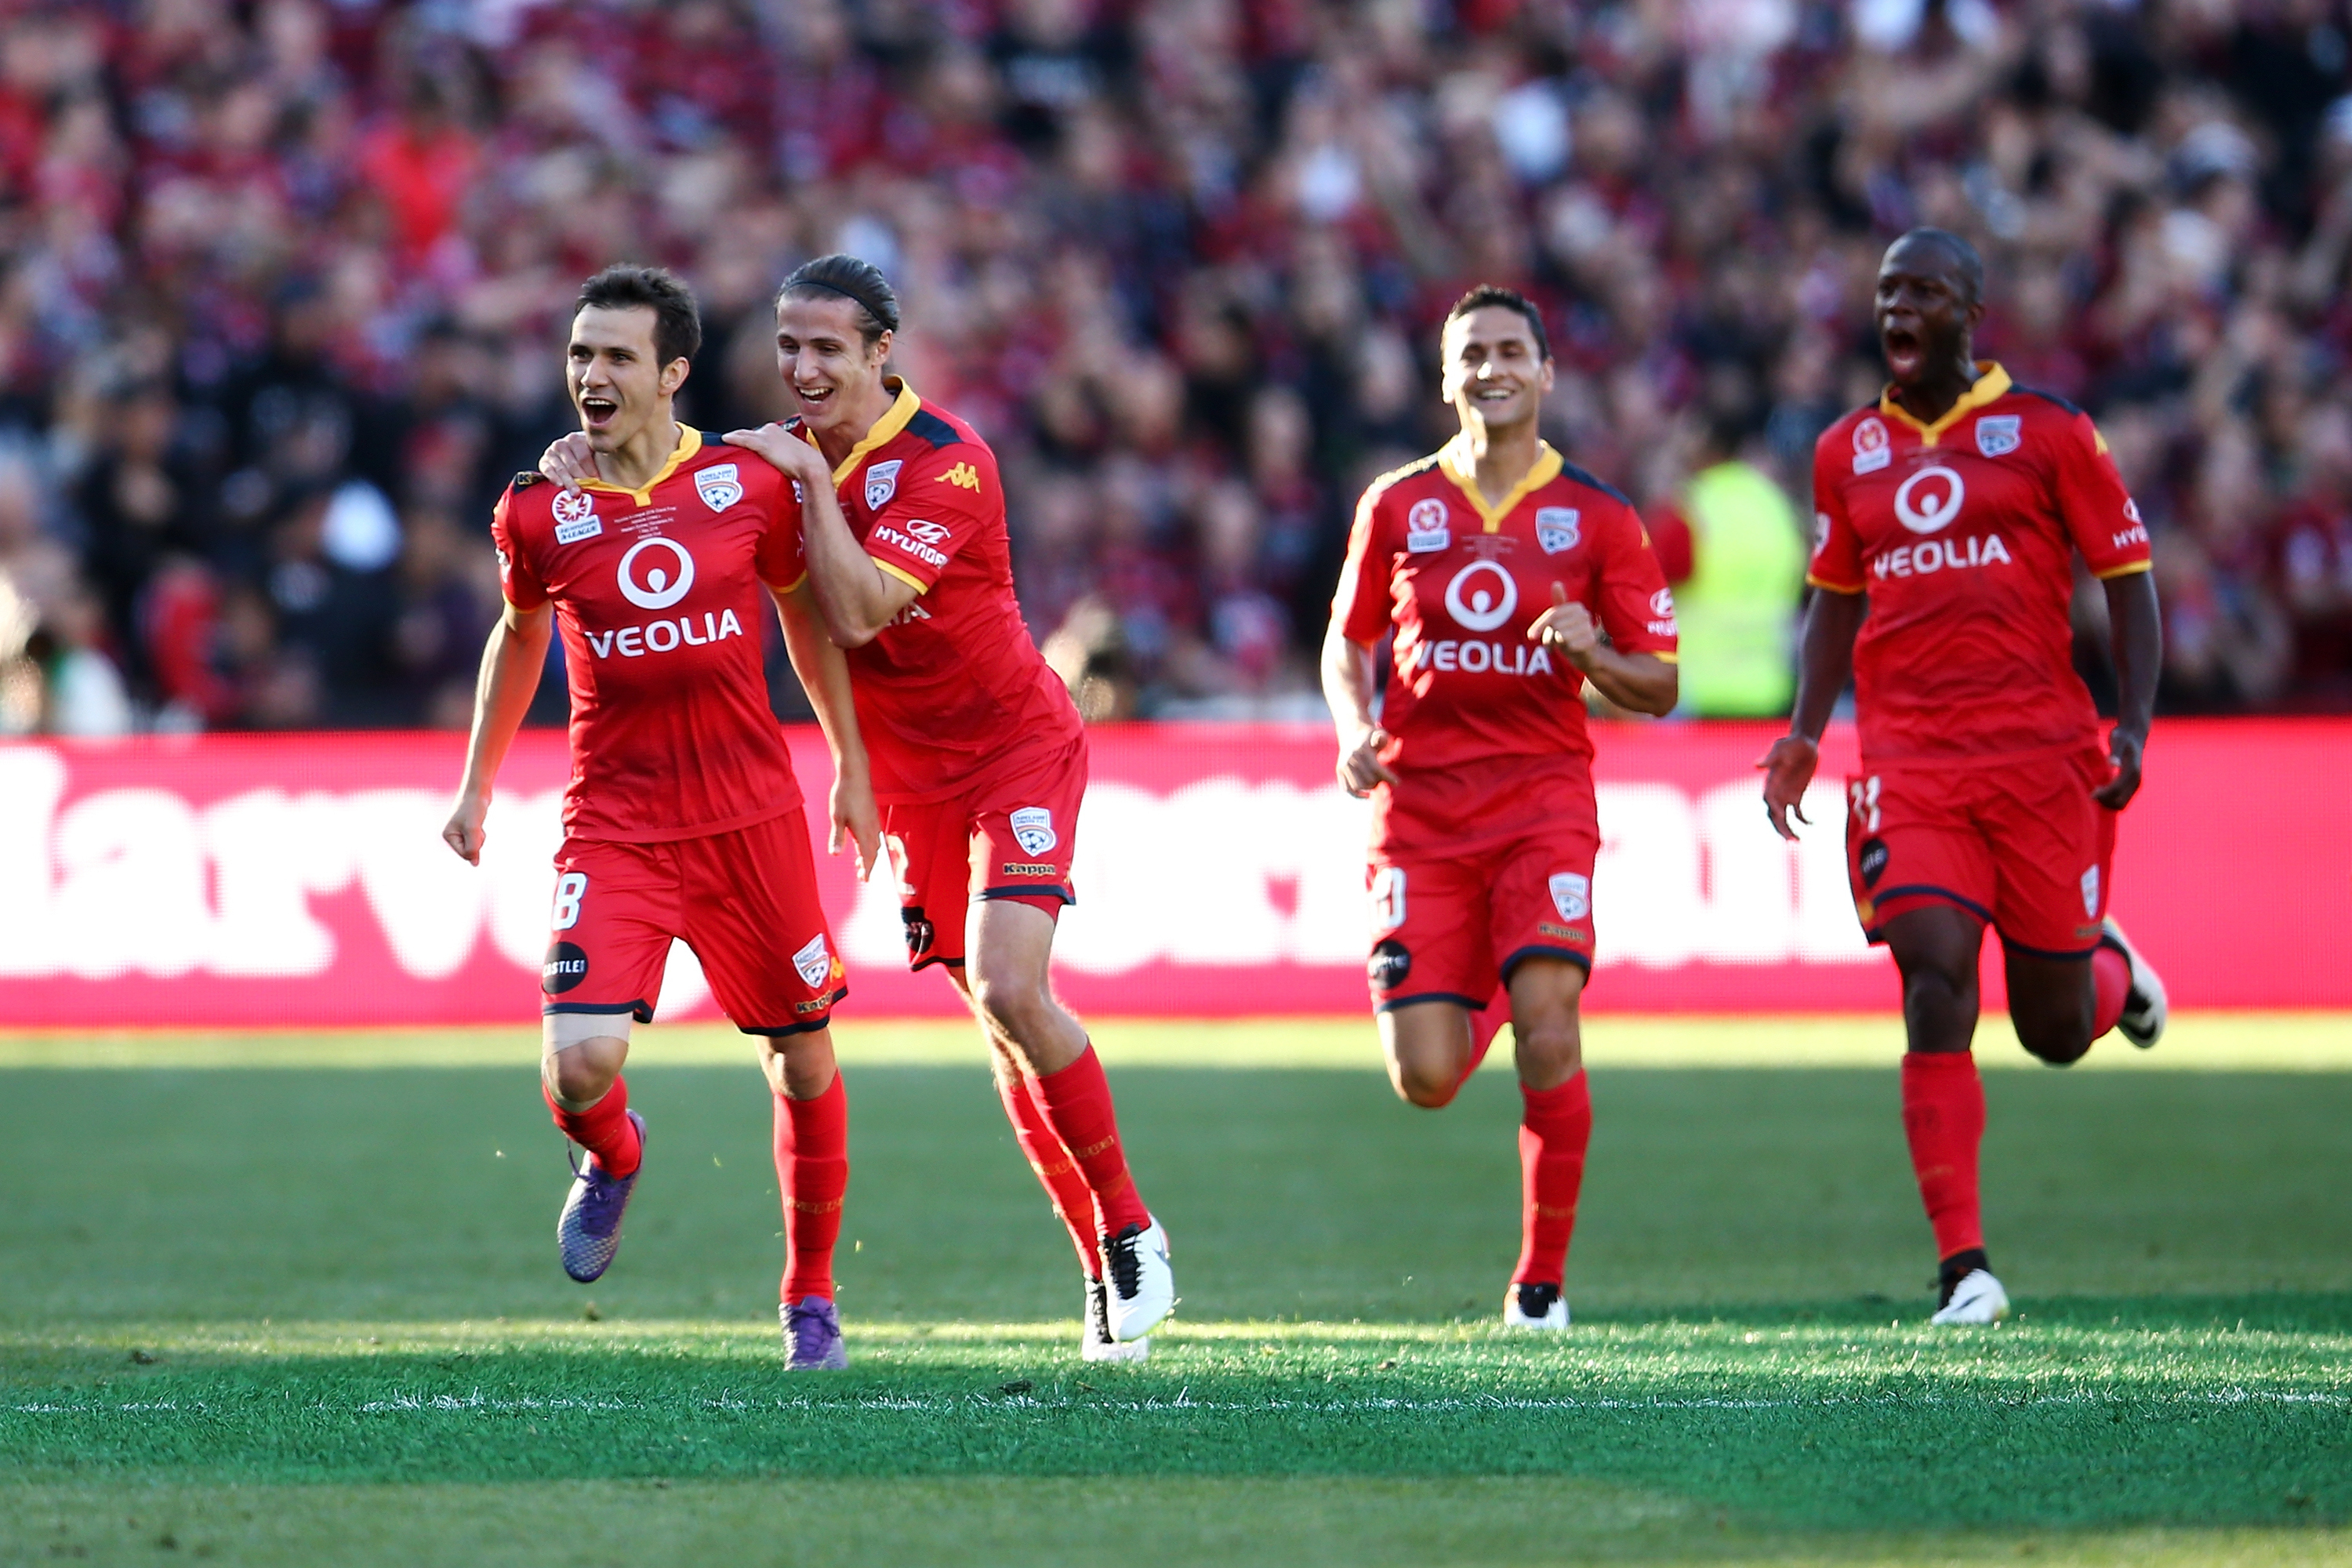 Adelaide Oval erupted as Reds players celebrate doubling their advantage.